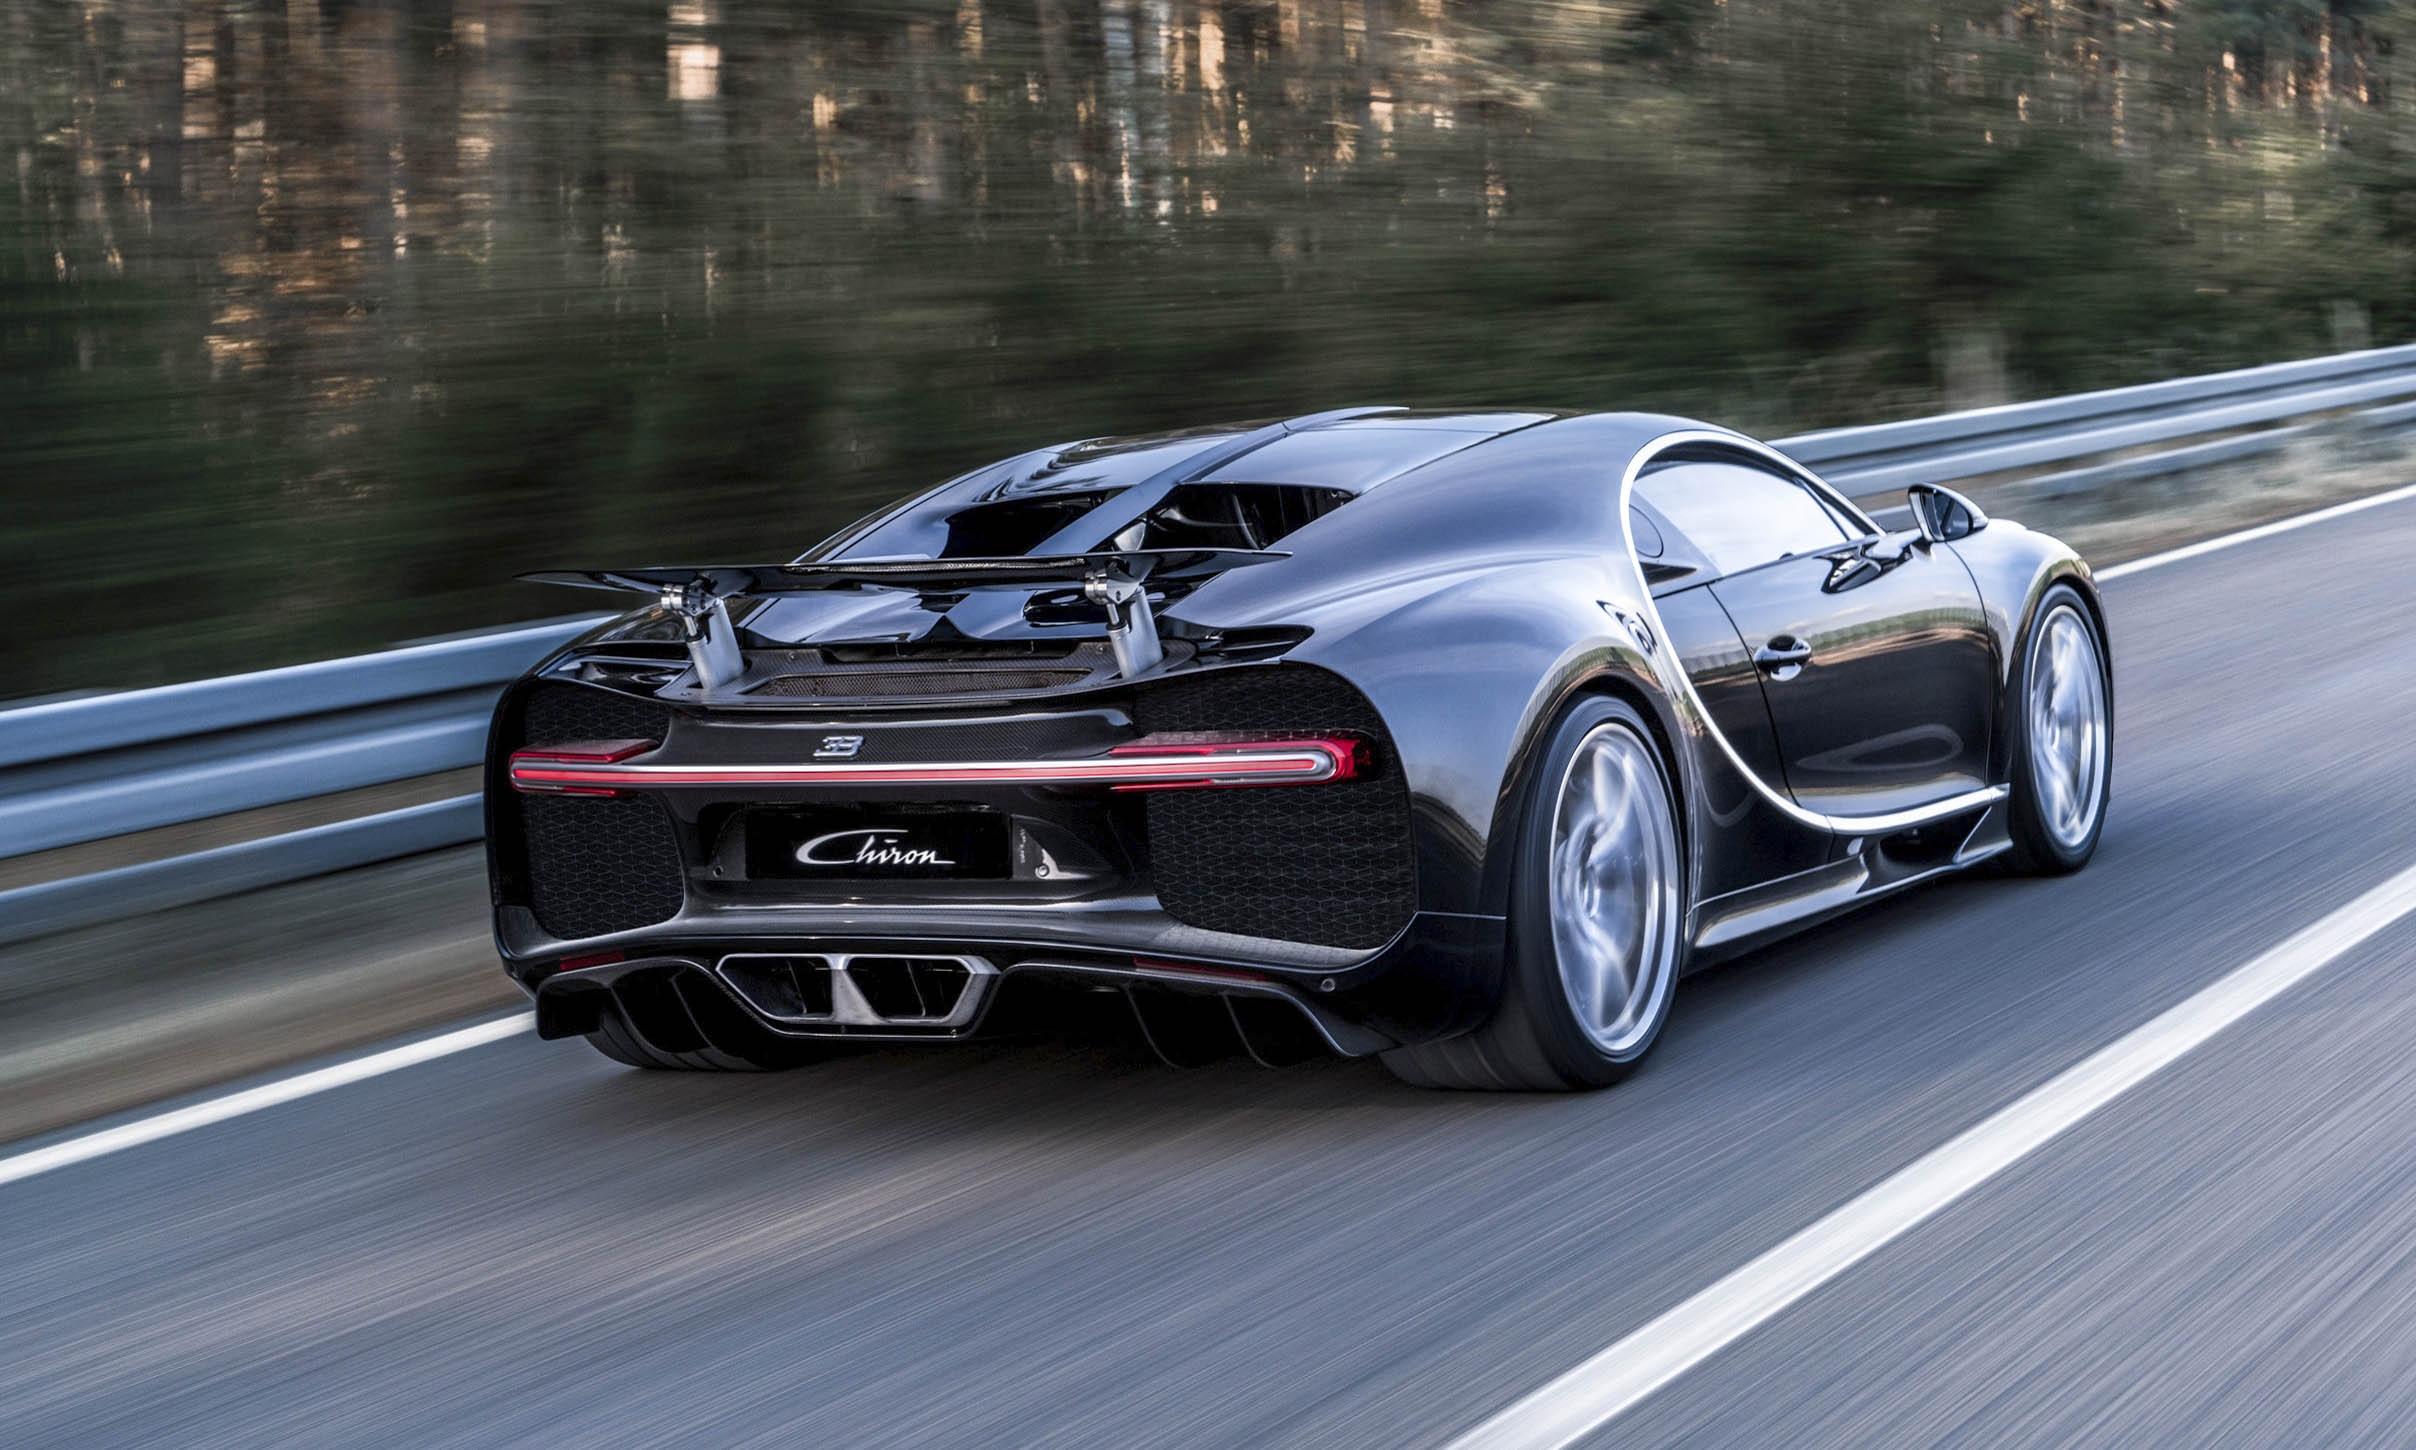 <p>          More than just a straight-line rocket, the Chiron could also go around corners. According to Bugatti, it could achieve 1.5 g in lateral acceleration, and the massive carbon-ceramic brakes could bring the sports car to a halt from 62 mph in about 100 feet.         </p>